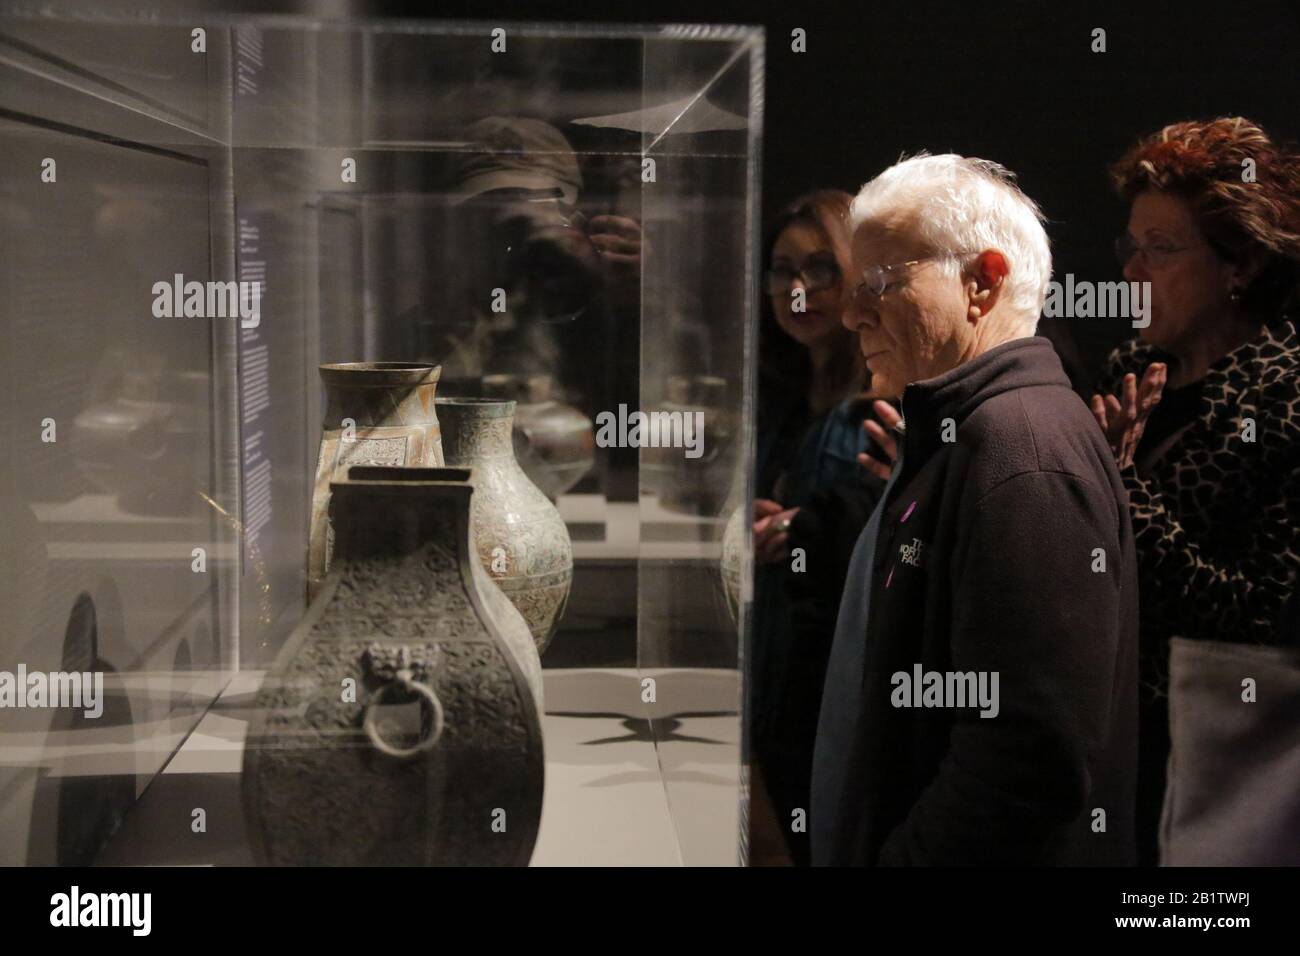 Houston, USA. 26th Feb, 2020. People view Chinese ritual bronzes during a media preview of the exhibition Eternal Offering: Chinese Ritual Bronzes in Houston, Texas, the United States, on Feb. 26, 2020. An exhibition of ancient Chinese bronze artworks will be on display from Feb. 29 to Aug. 9 at Asia Society Texas Center (ASTC) in Houston, ASTC announced on Wednesday night. Credit: Lao Chengyue/Xinhua/Alamy Live News Stock Photo